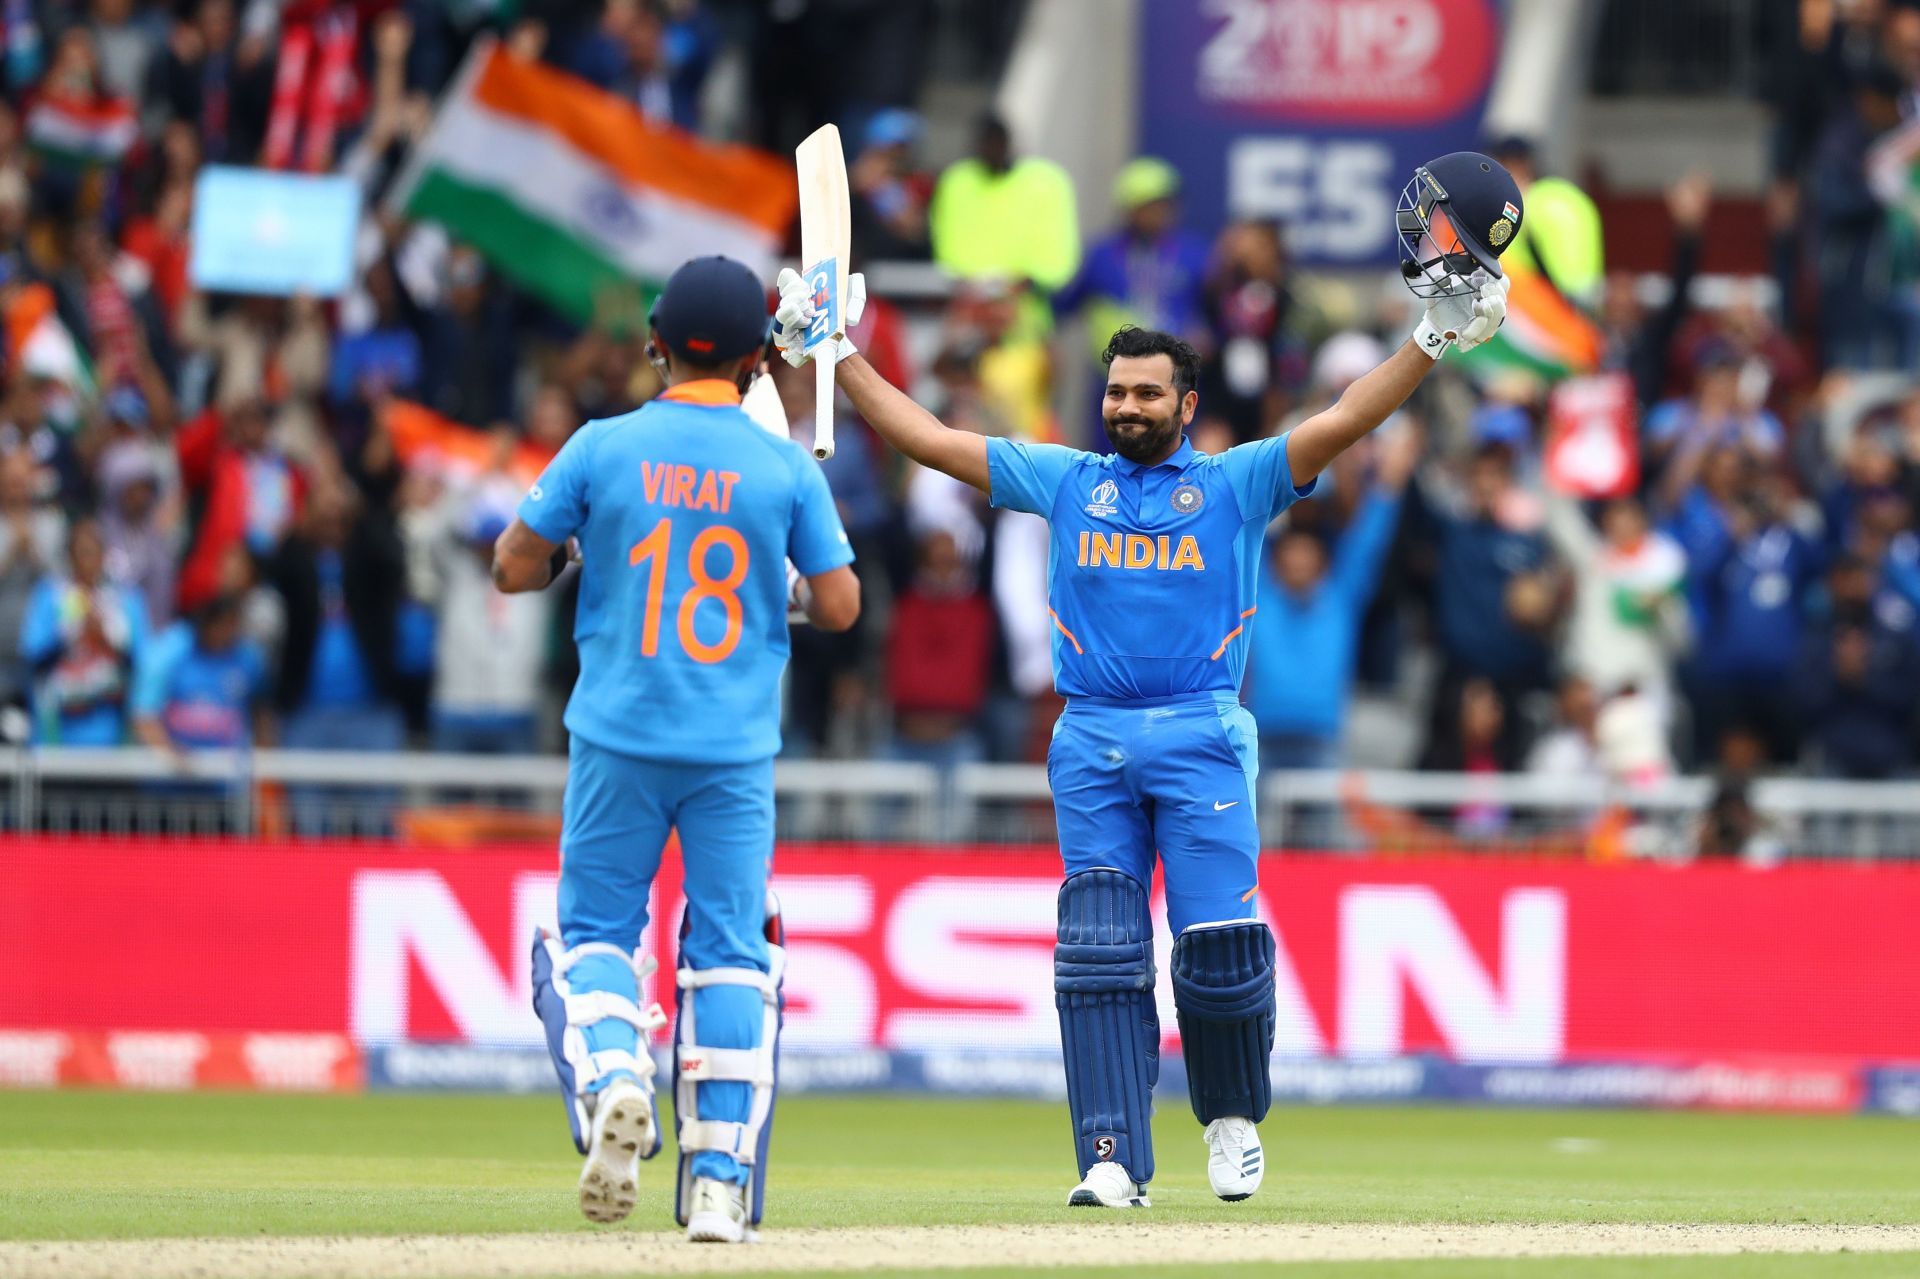 Rohit Sharma scored a breathtaking hundred against Pakistan in Manchester. (Credits: Getty)